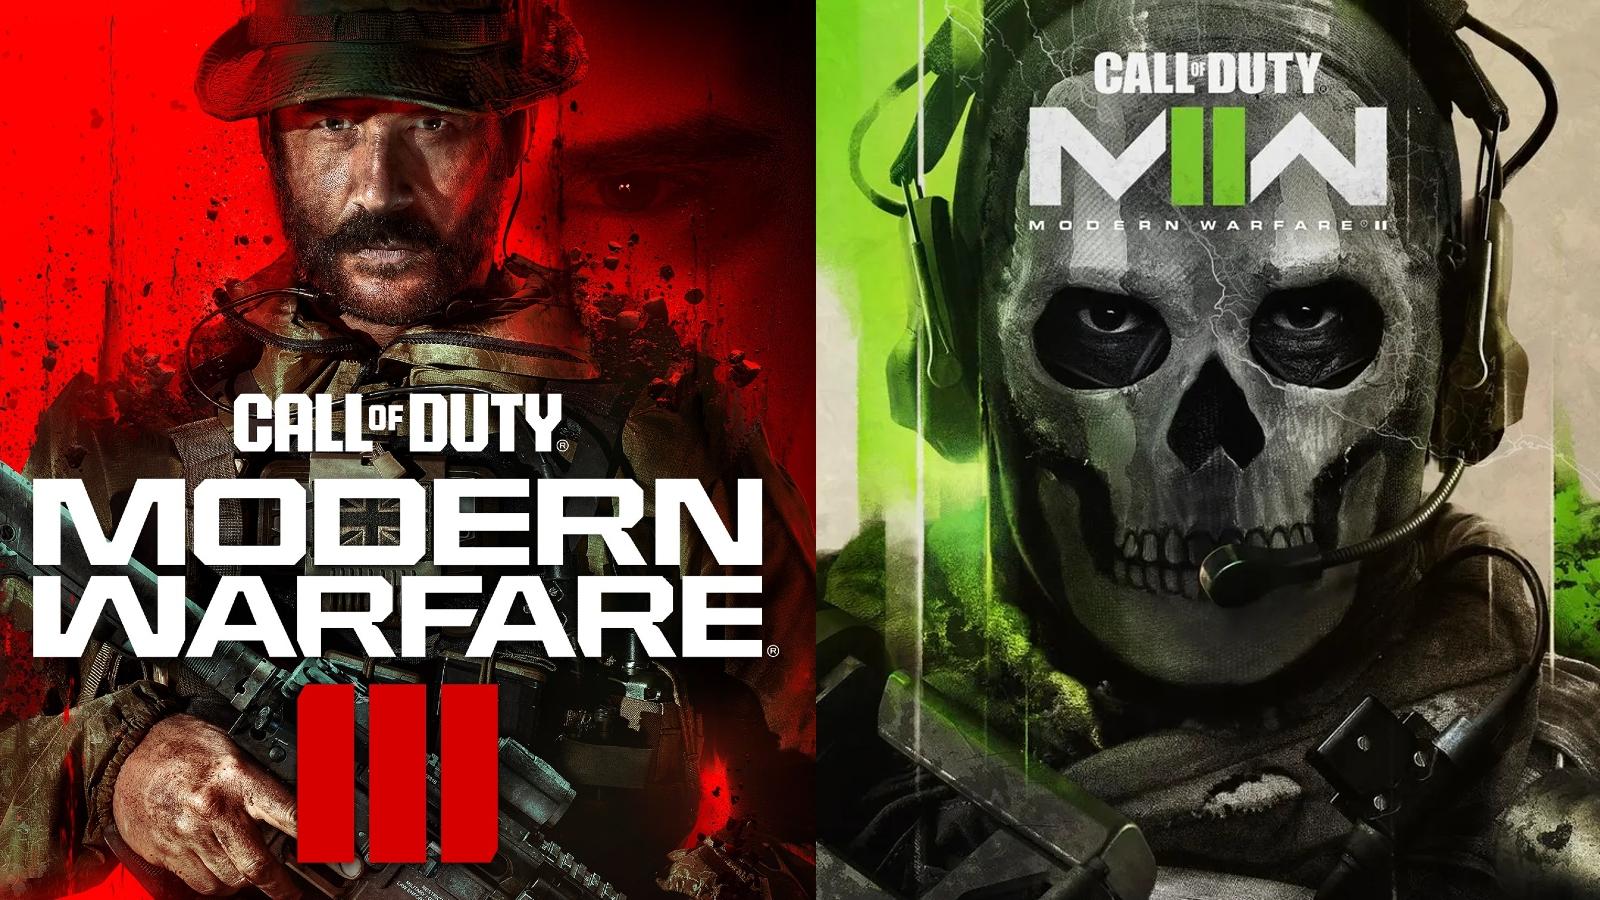 Call of Duty: Modern Warfare III Is a Game of Its Own, Not Just a